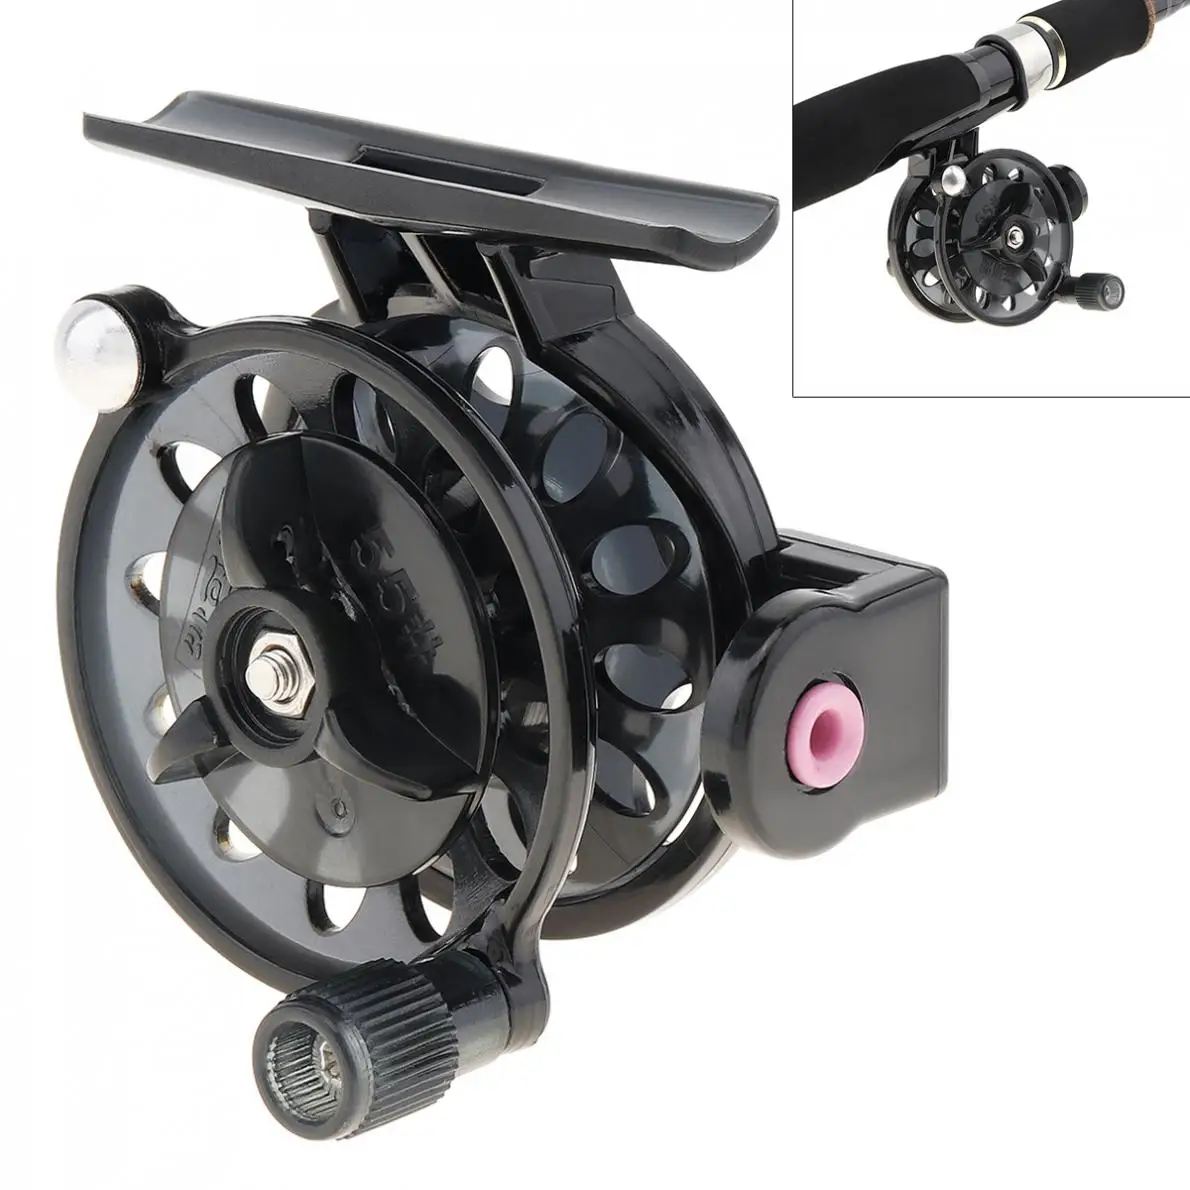 

1:1 High Quality Private Reels Portable Mini Fishing Reel Carp Winter Ice Fishing Reel Spool Outdoor Fish Tackle Gear